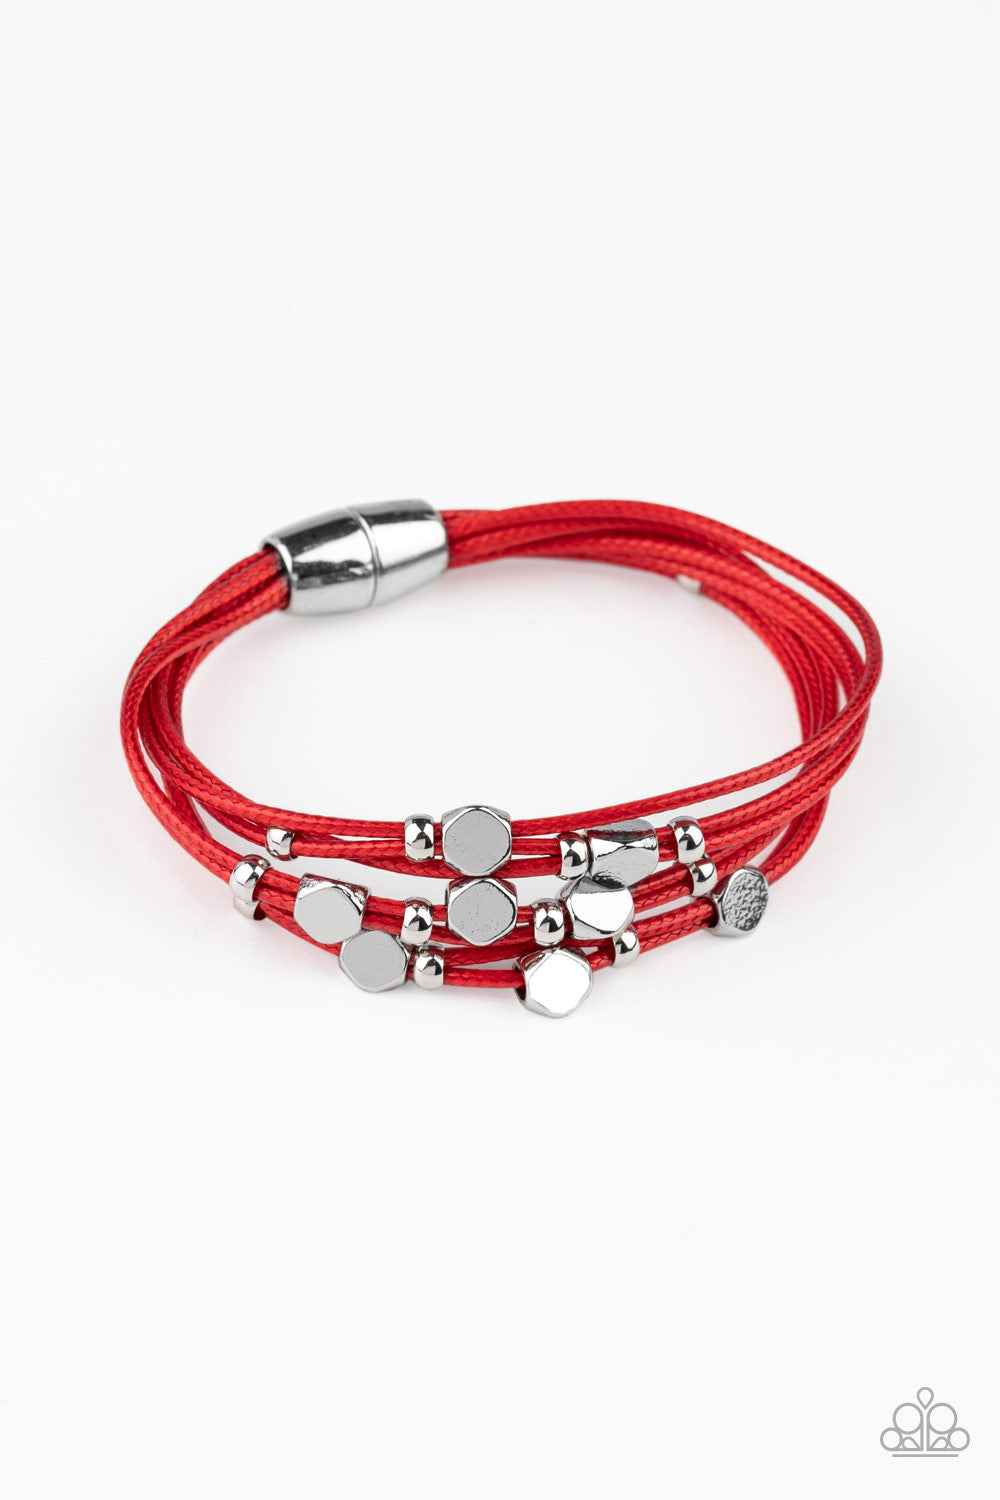 Cut The Cord Red-Bracelet